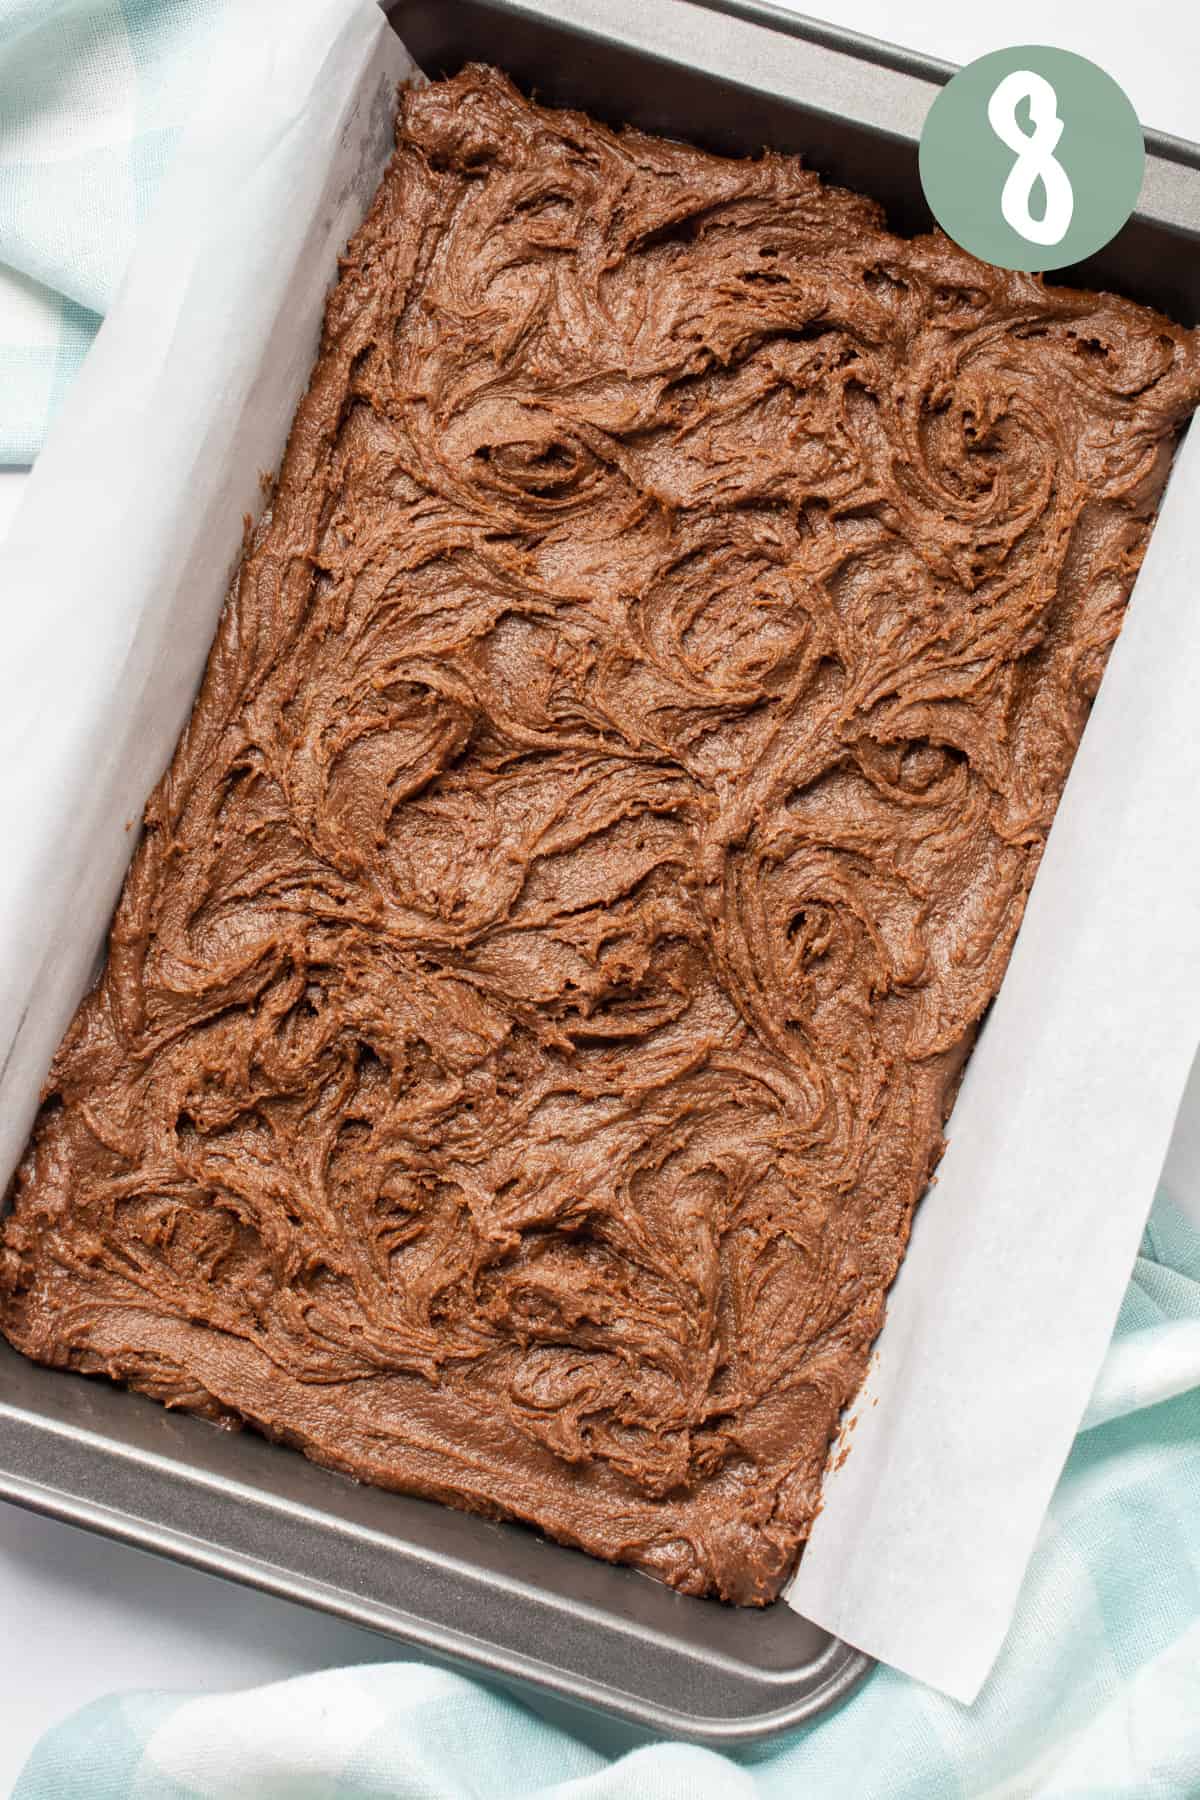 Vegan brownie batter in a 7x11-inch baking pan lined with parchment paper.